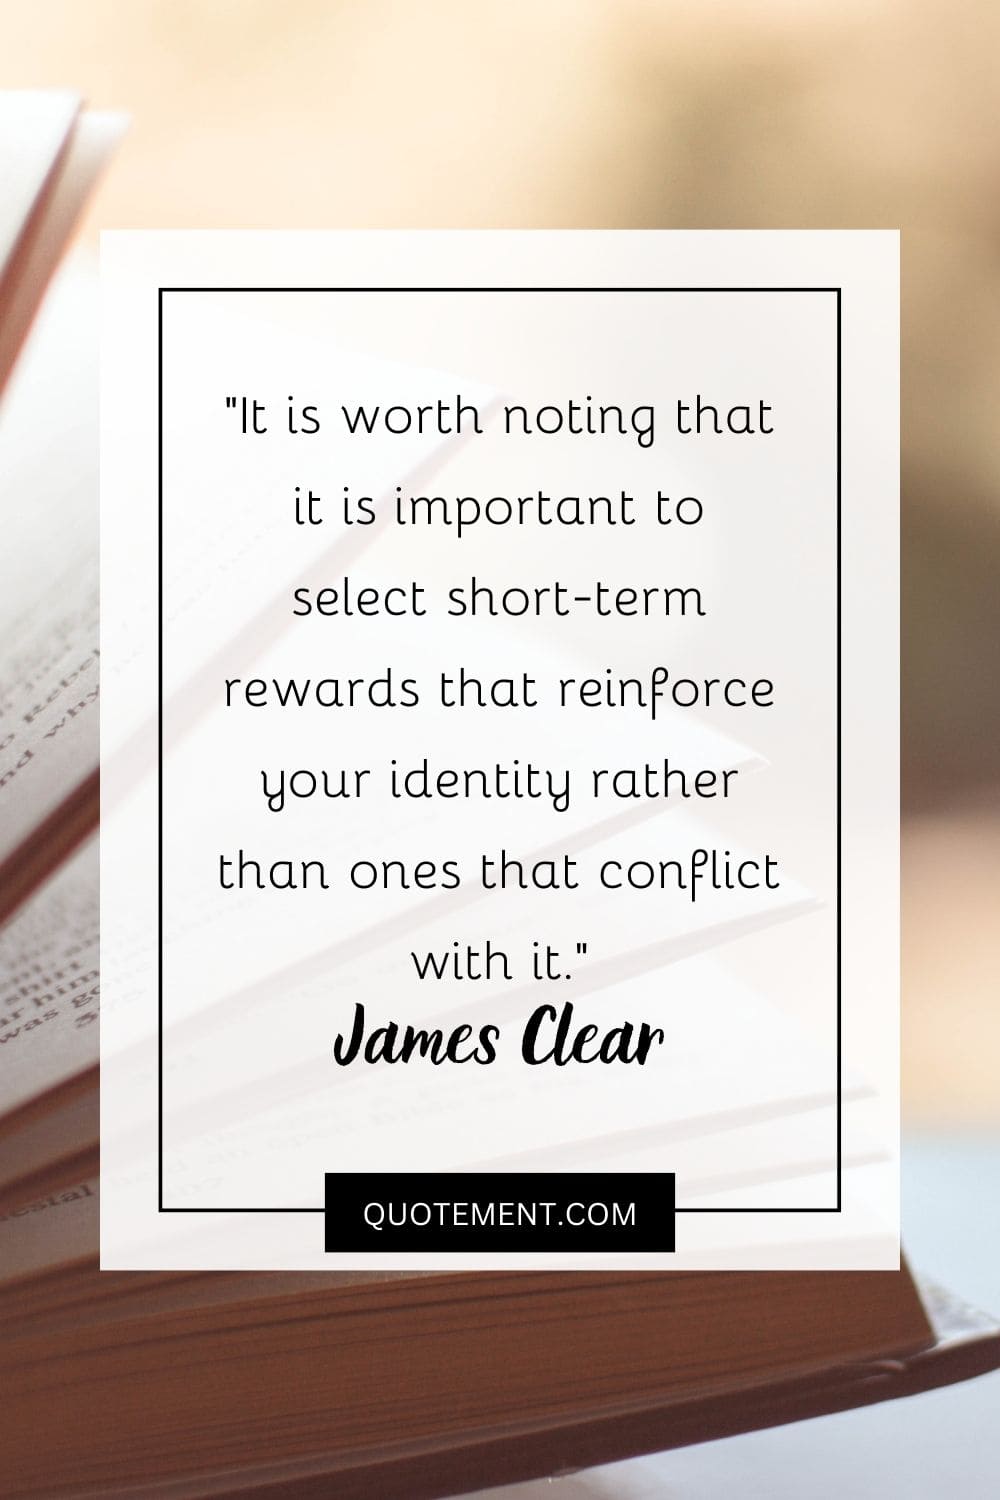 It is worth noting that it is important to select short-term rewards that reinforce your identity rather than ones that conflict with it